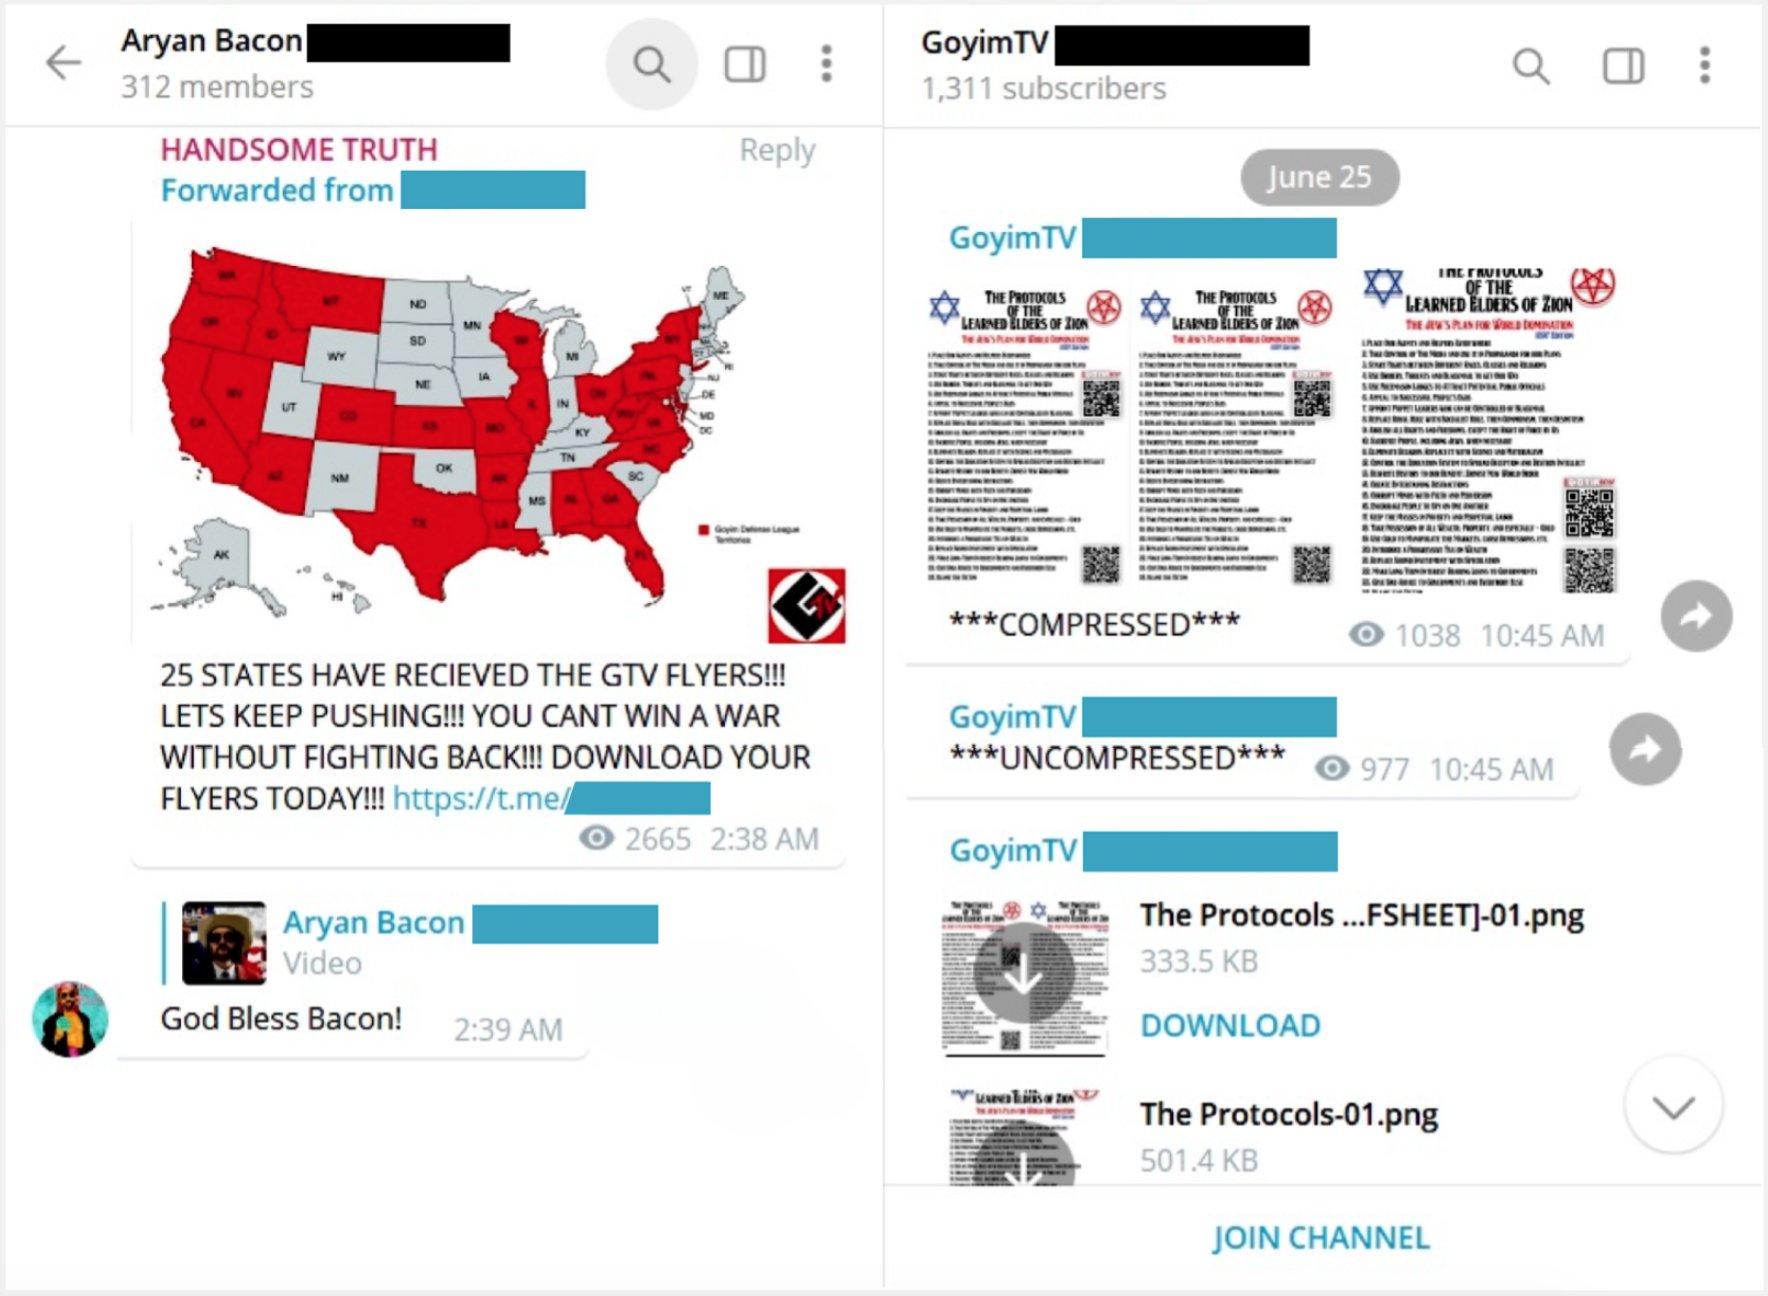 GDL chats bragging about spreading propaganda in 25 states